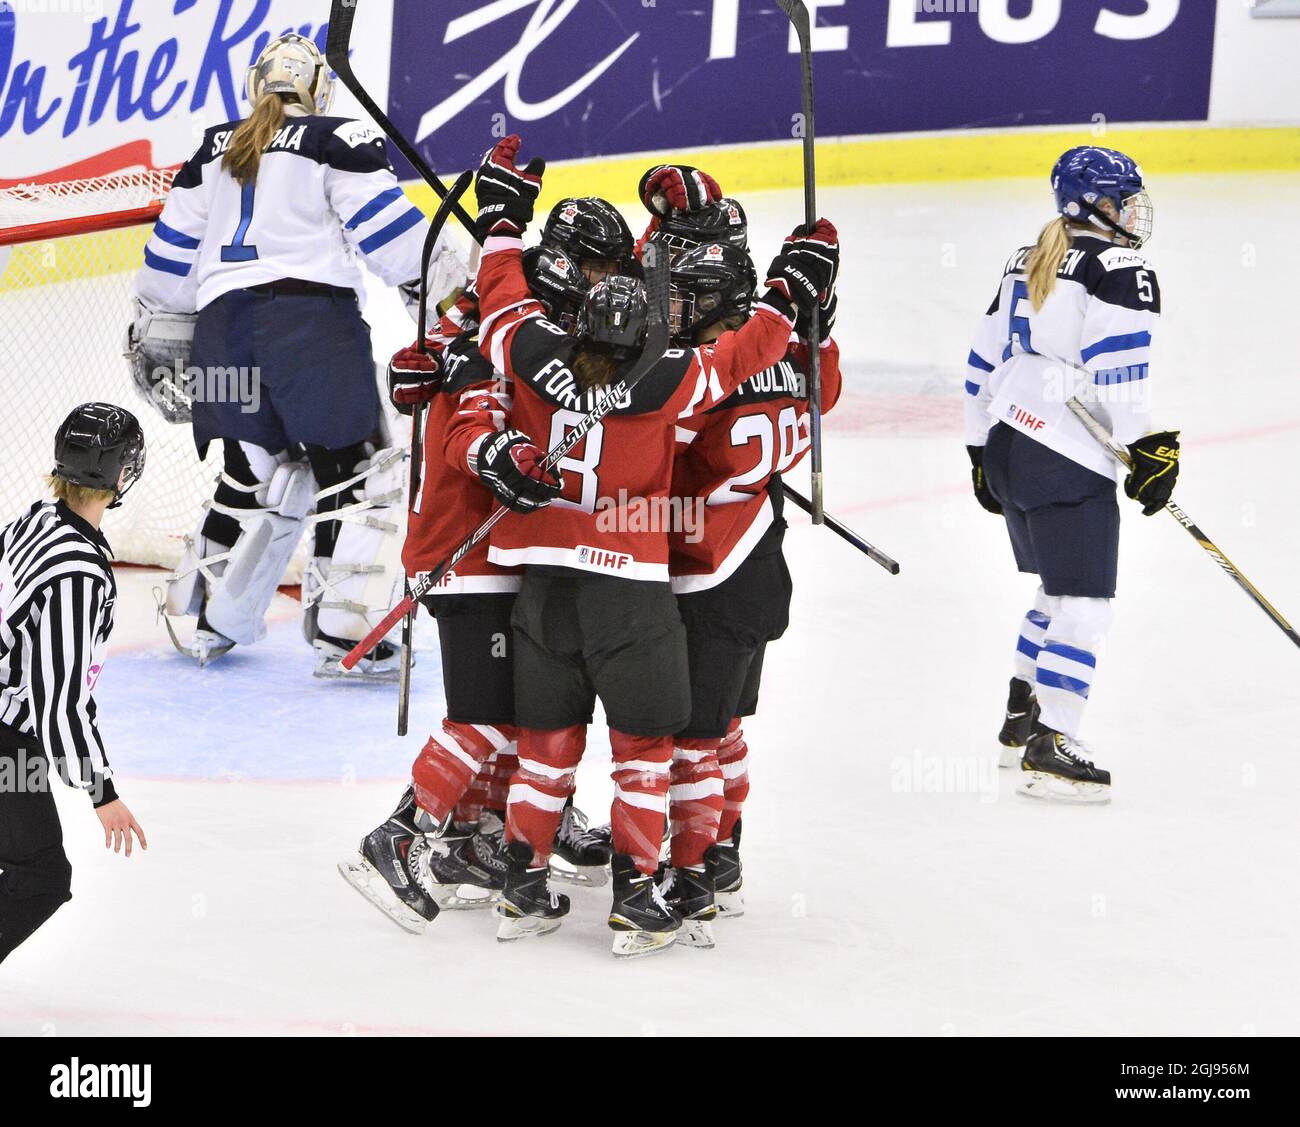 Canadian players celebrate after Brigette Lacquette (4, hidden) scored the opening goal, as Finlands goalkeeper Eveliina Suonpaa (1) and Anna Kilponen (5) looks away during the 2015 IIHF Ice Hockey Women's World Championship group A match between Canada and Finland at Malmo Isstadion in Malmo, southern Sweden, on March 31, 2015. Photo: Claudio Bresciani / TT / code 10090 Stock Photo